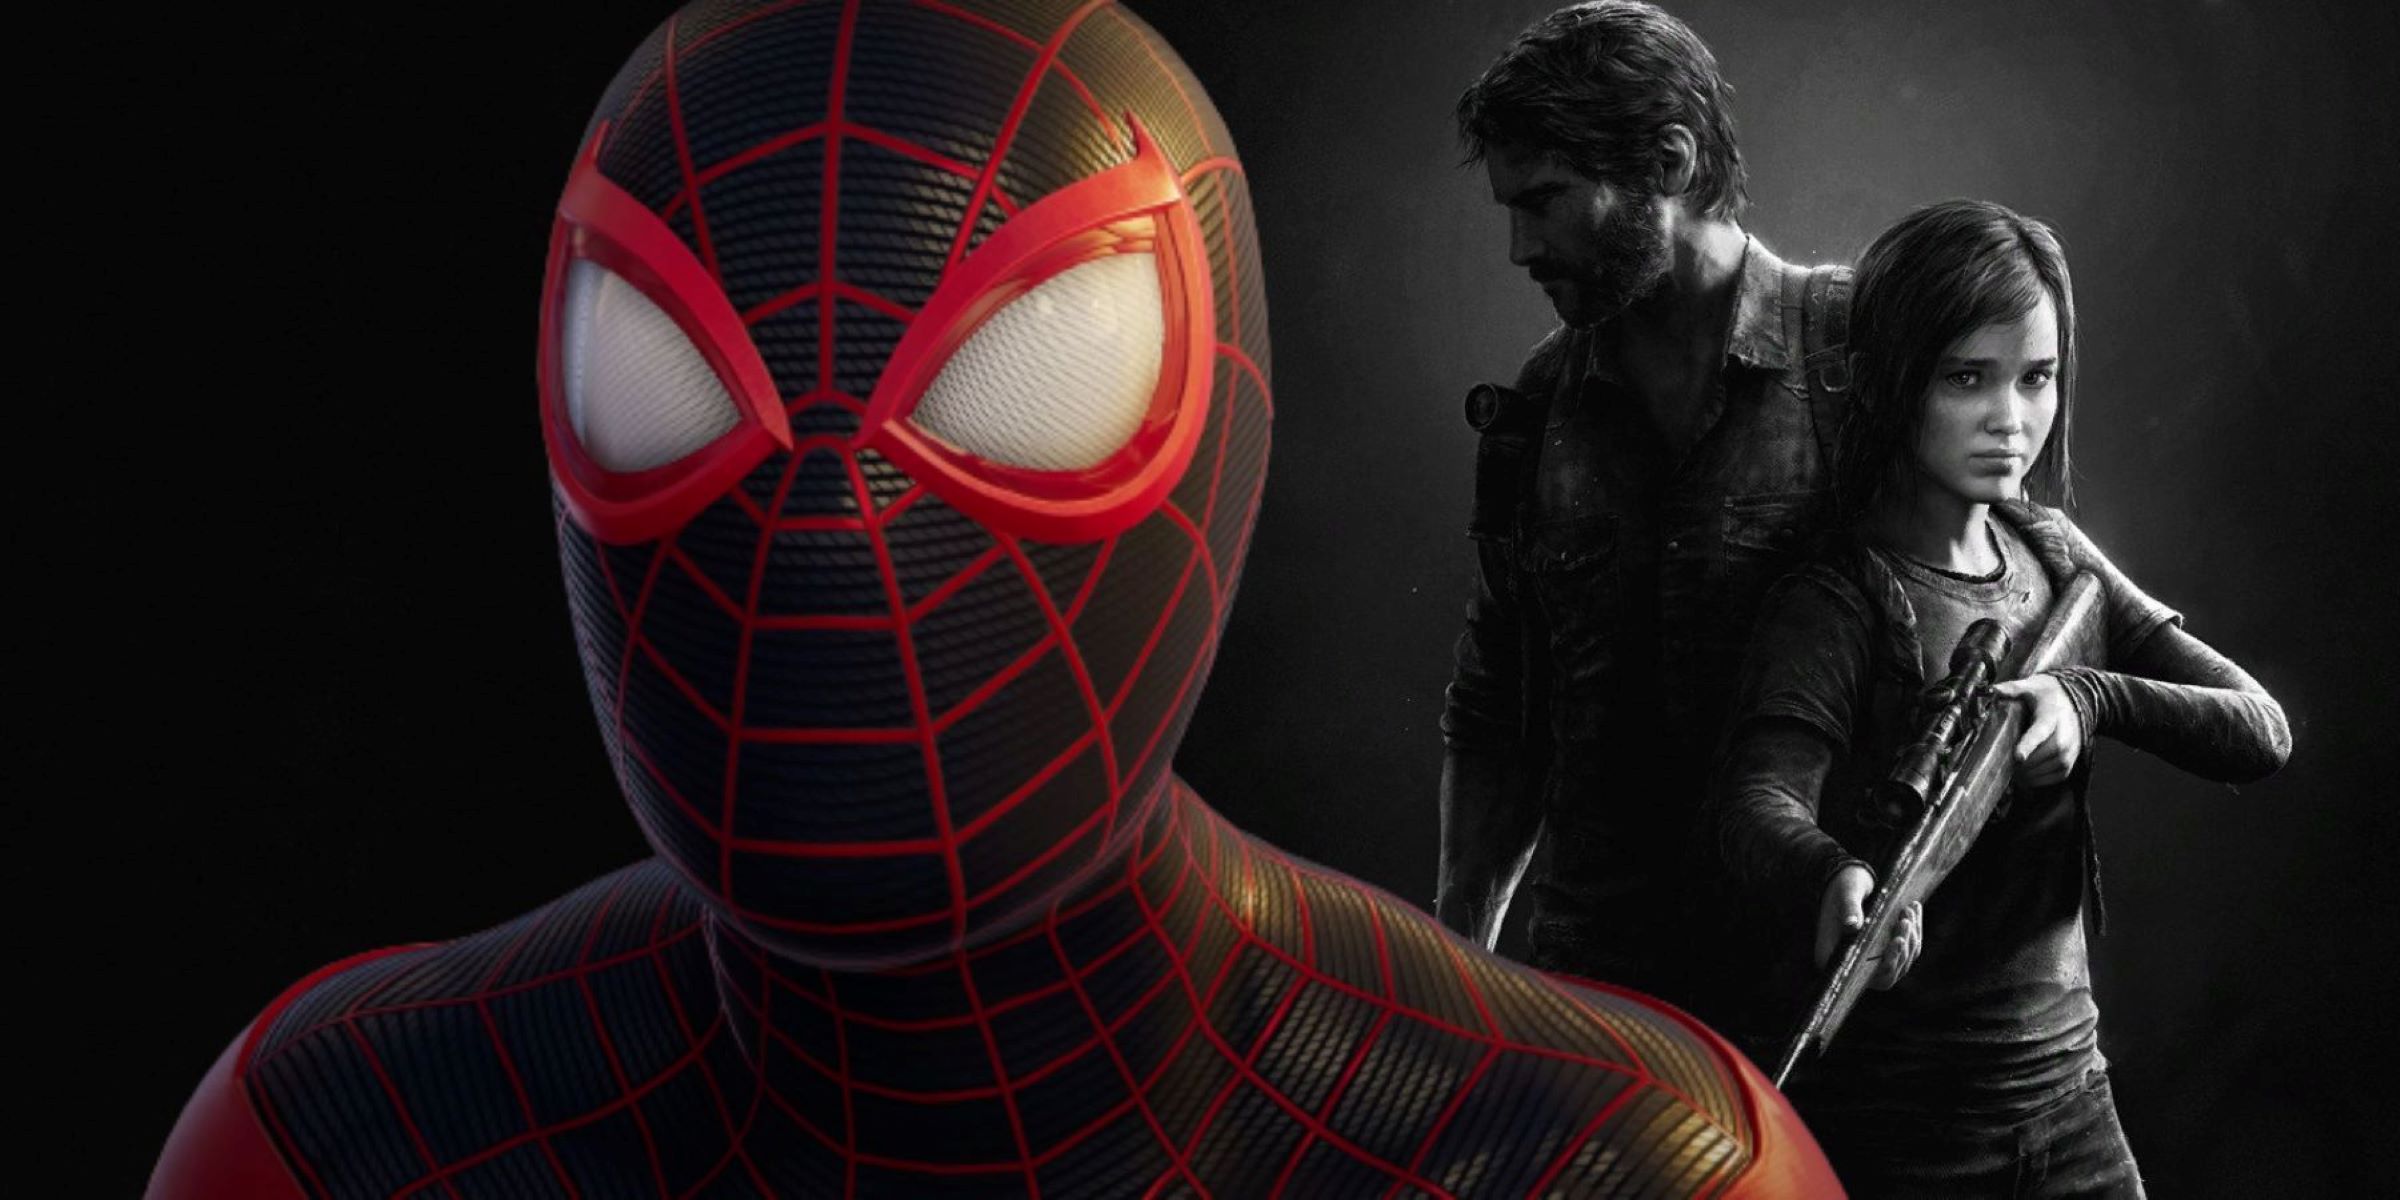 The Ultimate Showdown: The Last Of Us 2 Vs Marvel's Spider-Man For PS4 - Which Game Reigns Supreme?